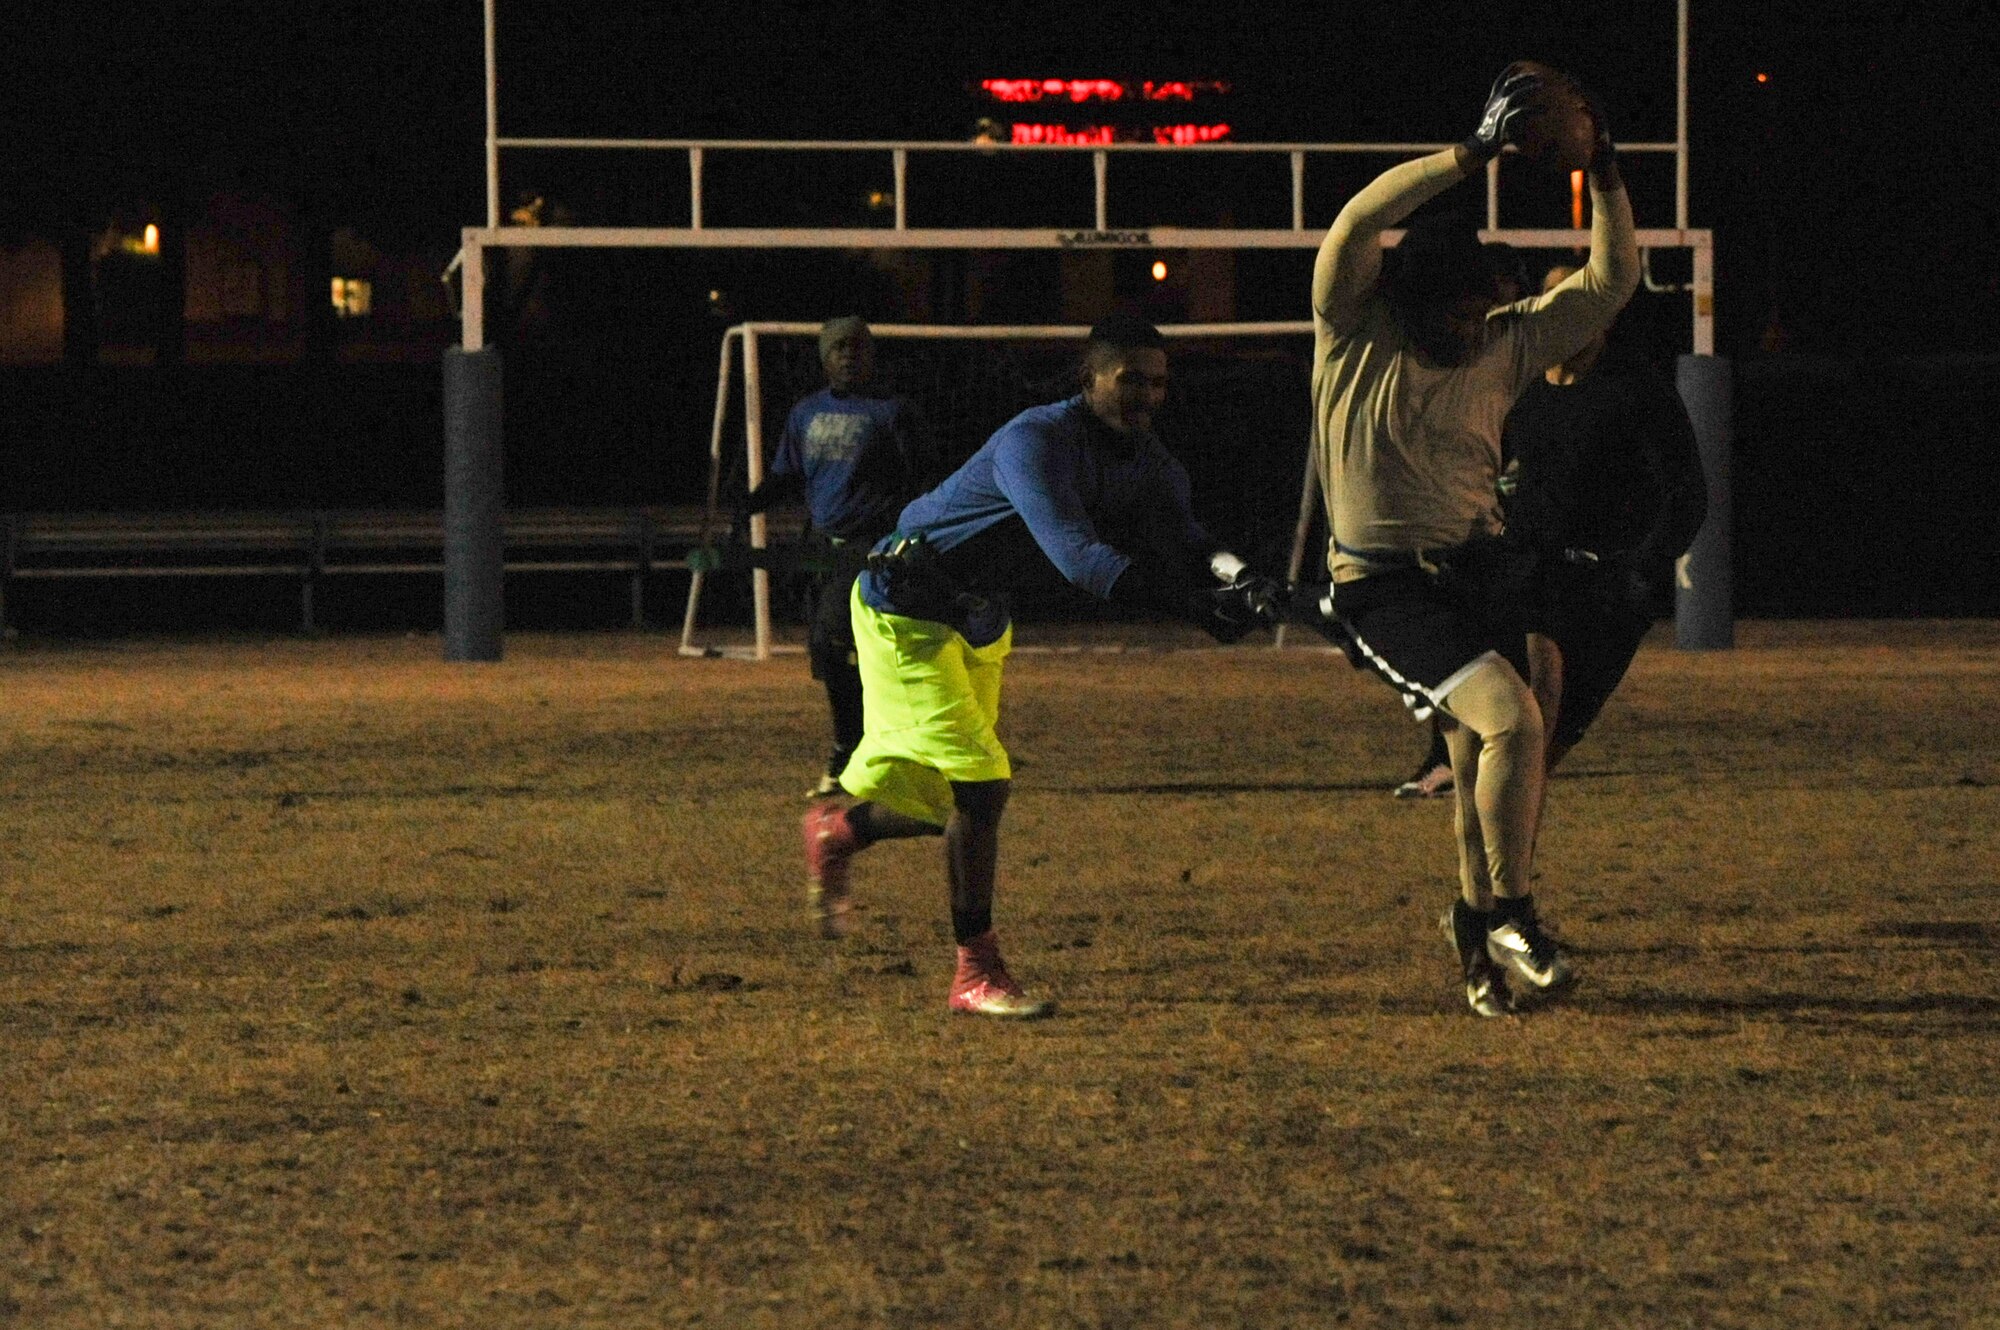 Airman 1st Class Trayvon Neil, a 19th Maintenance Squadron #3 player, dashes forward with the ball as his flag is pulled off Dec. 9, 2014, at Little Rock Air Force Base, Ark. The 19th MXS #3 played against the 314th Aircraft Maintenance Squadron and lost (U.S. Air Force photo by Airman 1st Class Mercedes Muro) 